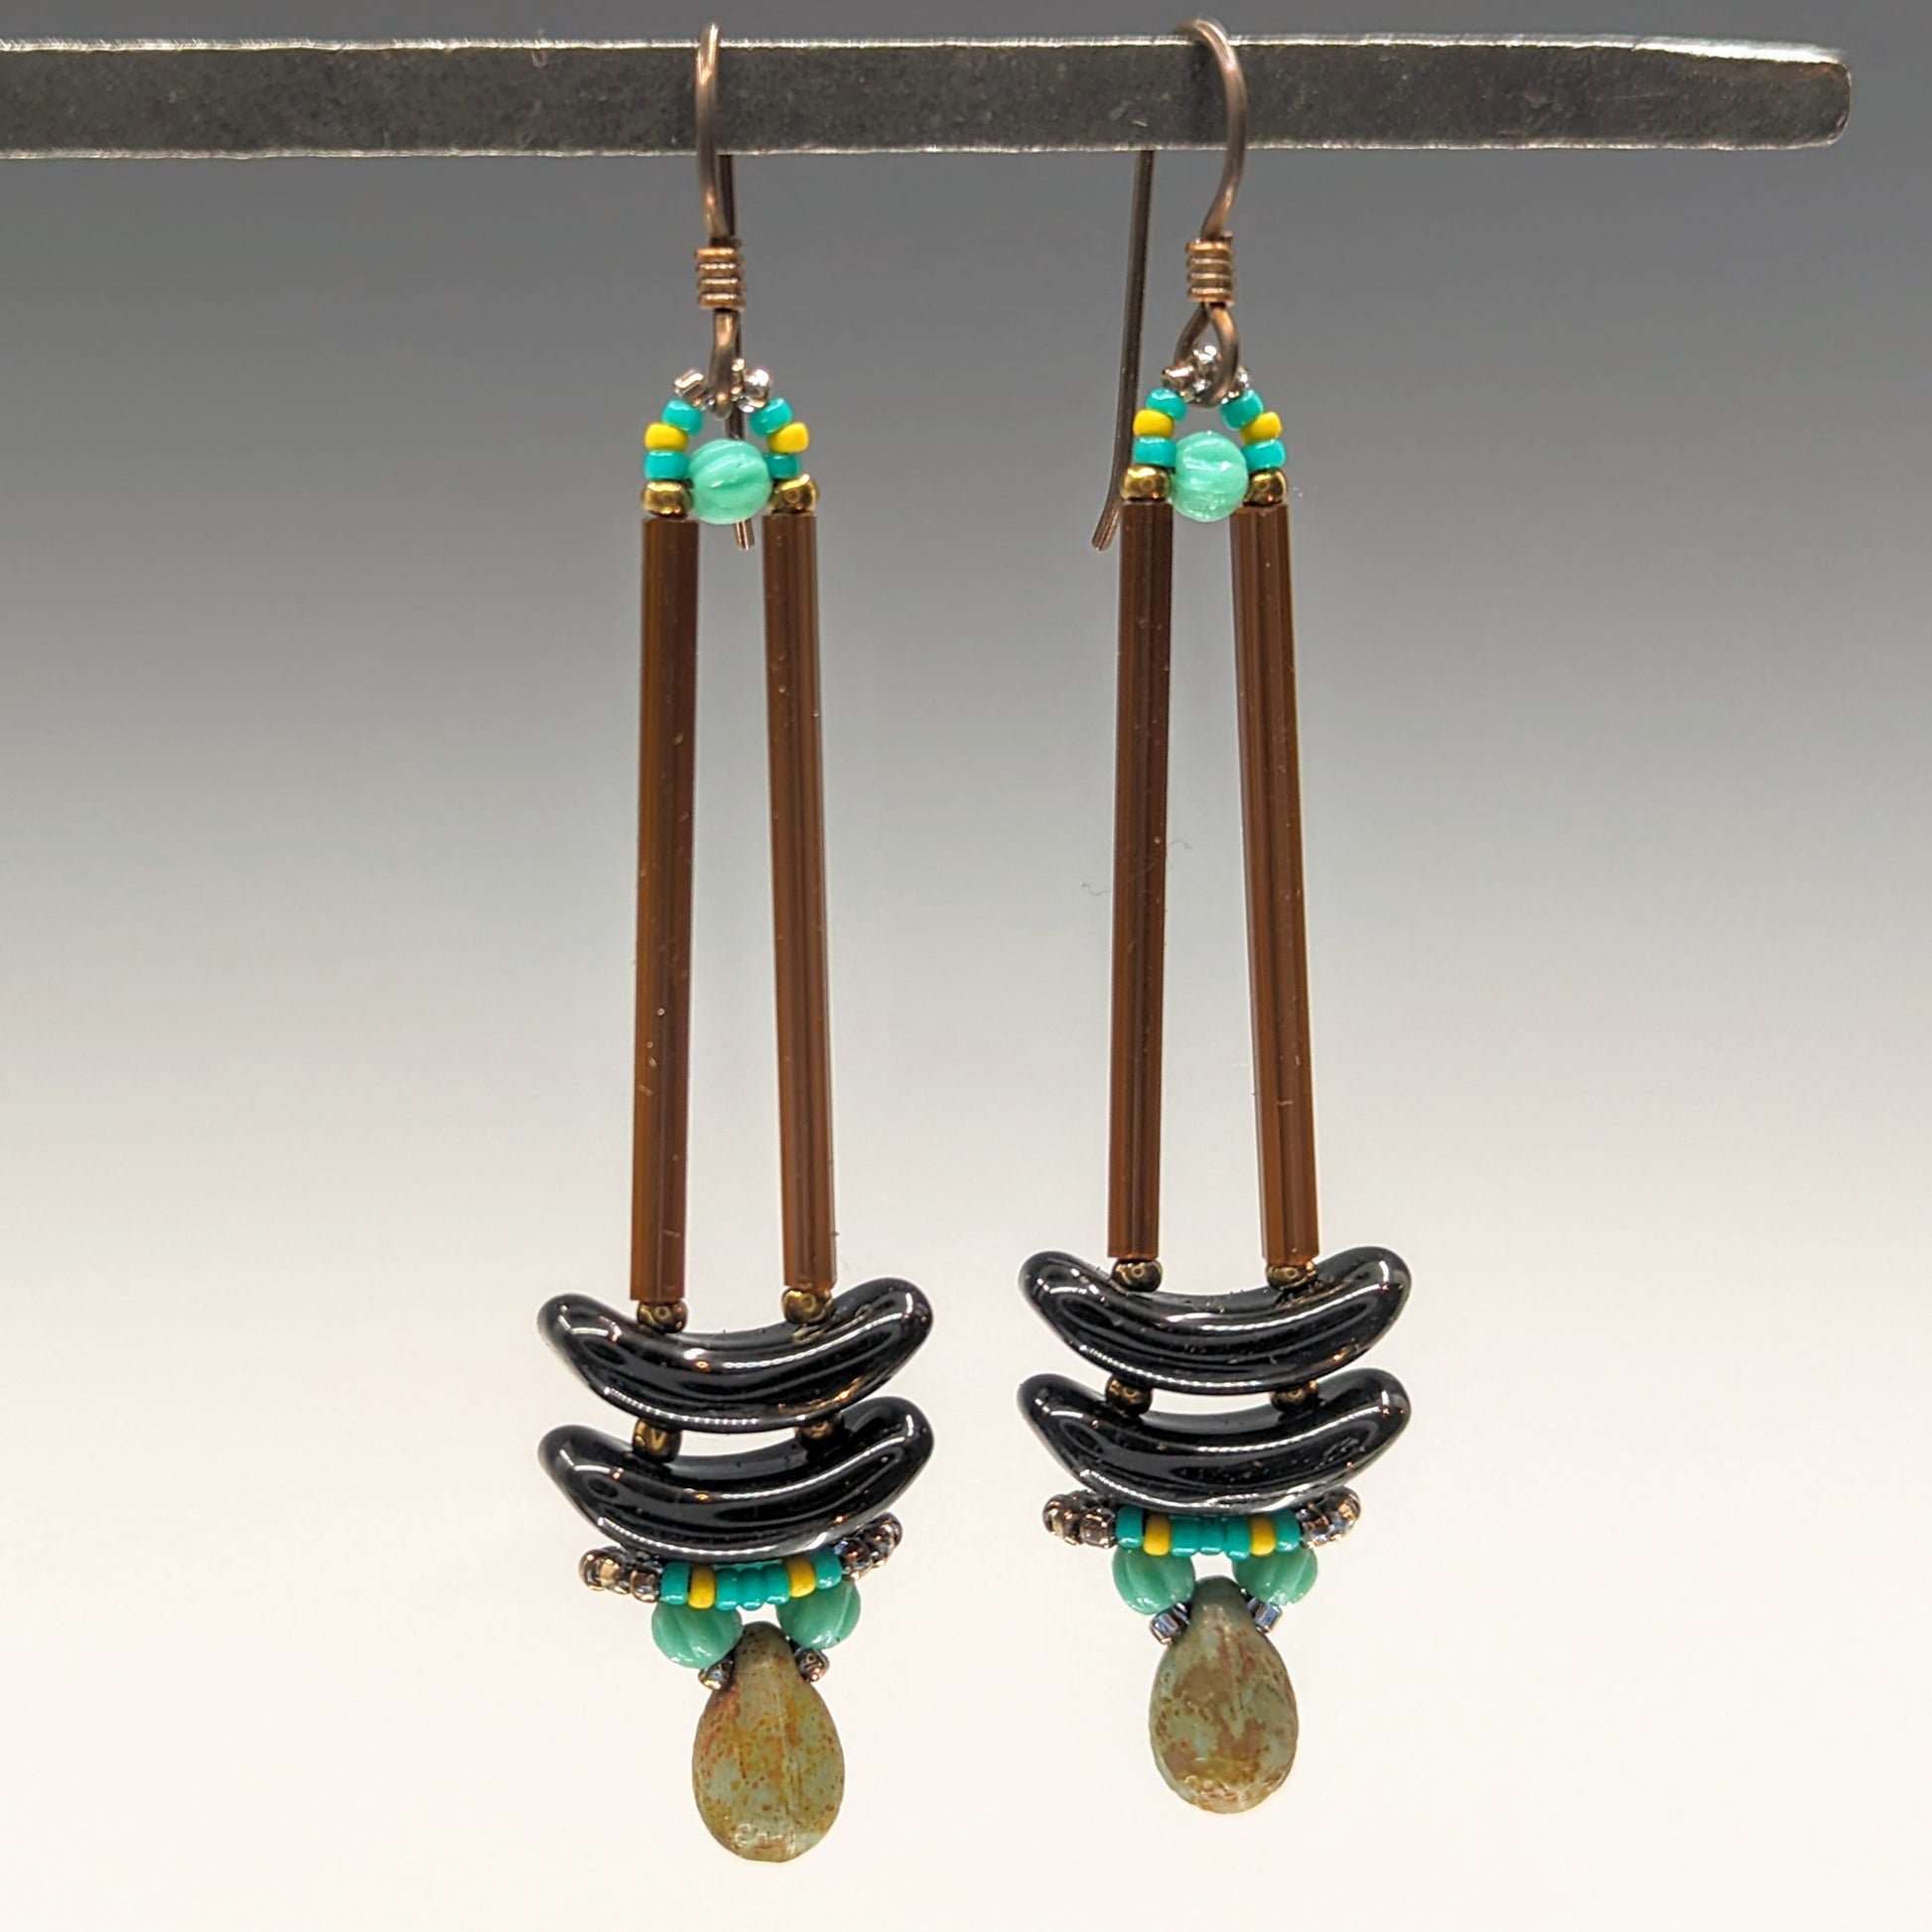 Earrings that look similar to a medicine dropper hang from  a black bar. There are two long, brown beads forming narrow vertical columns ending at the top of two black stacked arc shaped beads. At the bottom is a rustic turquoise drop shaped bead, surrounded by a belt of yellow and teal beads.